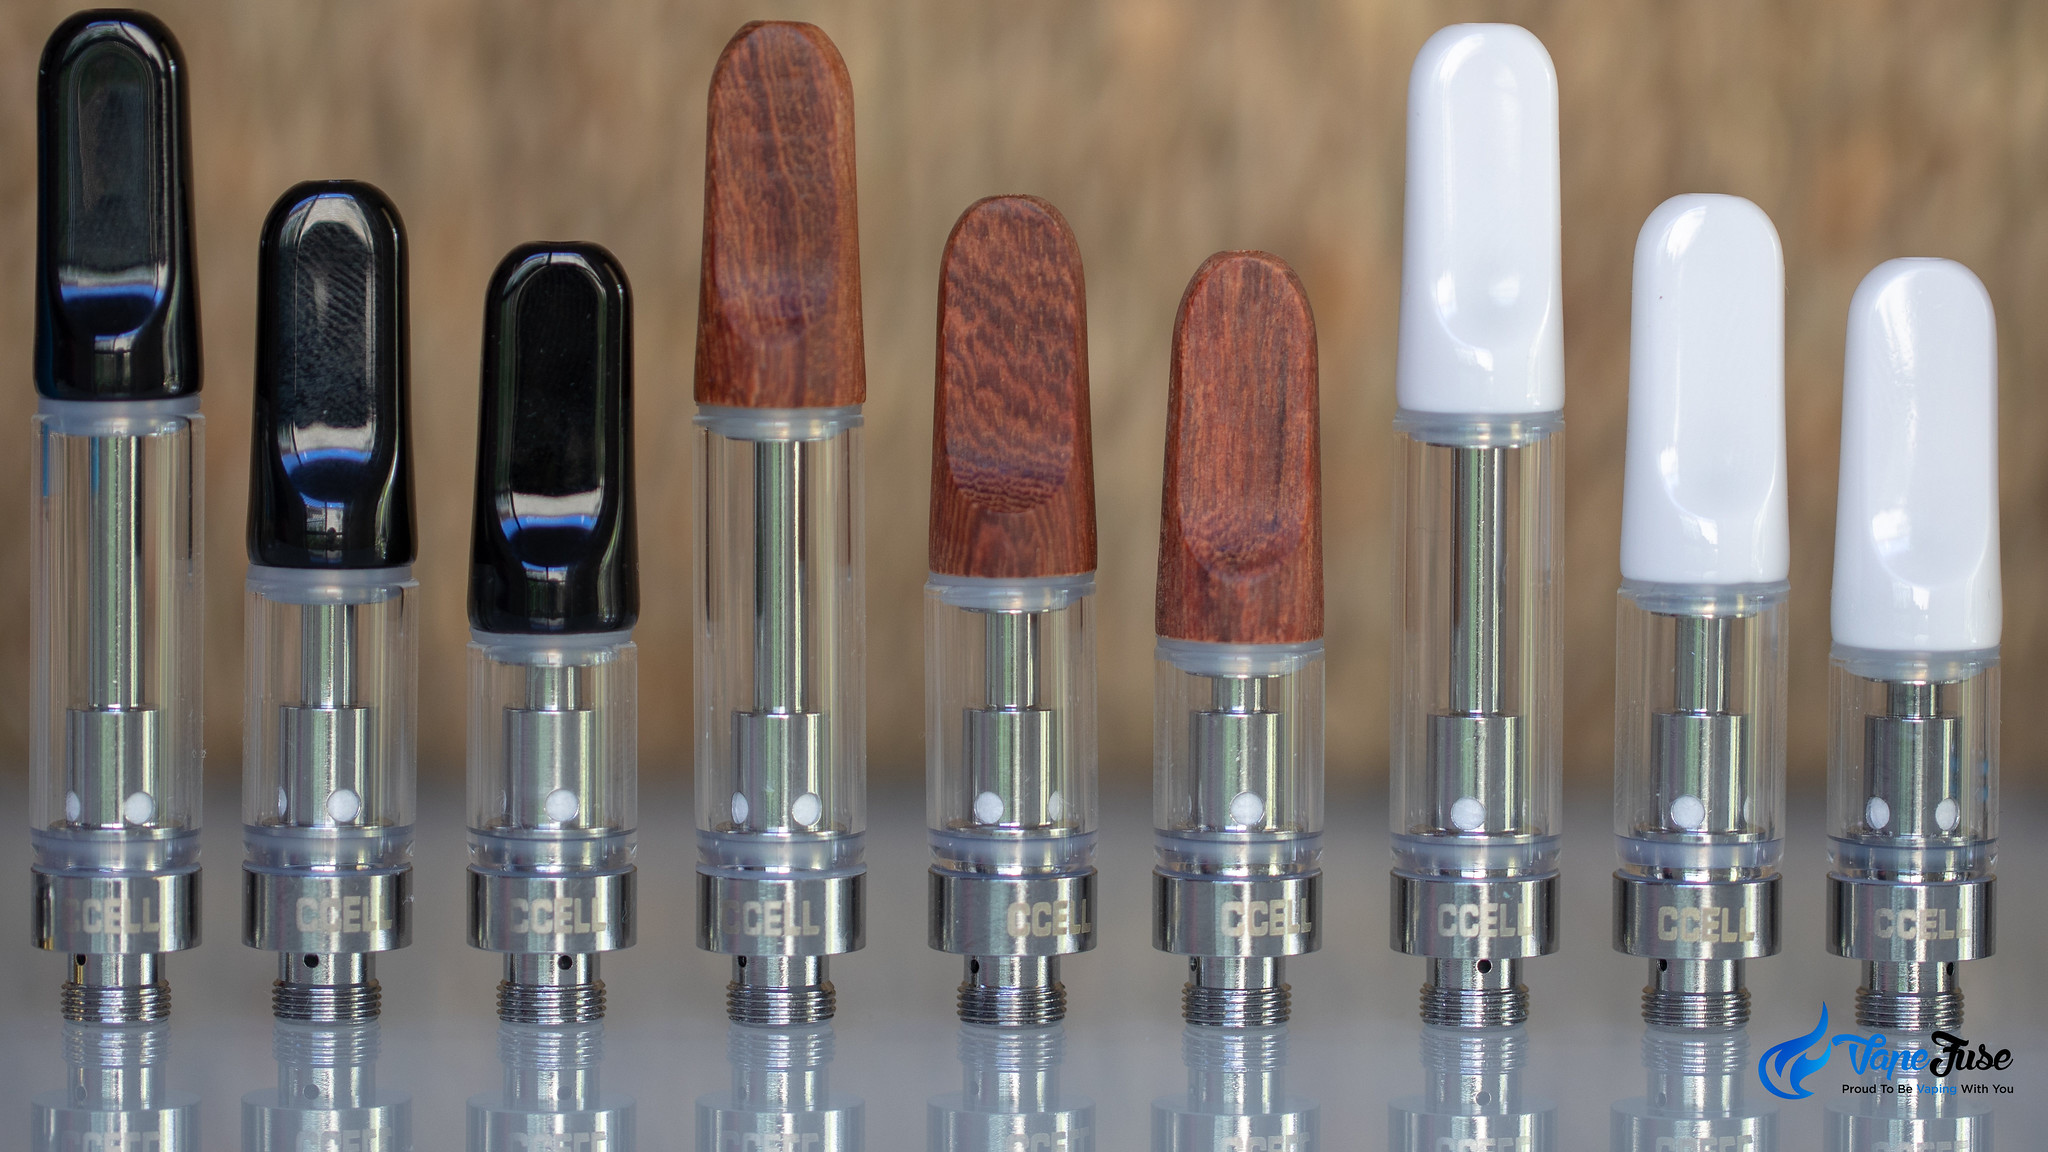 TH2 carts in 3 sizes and 3 sorts of mouthpieces